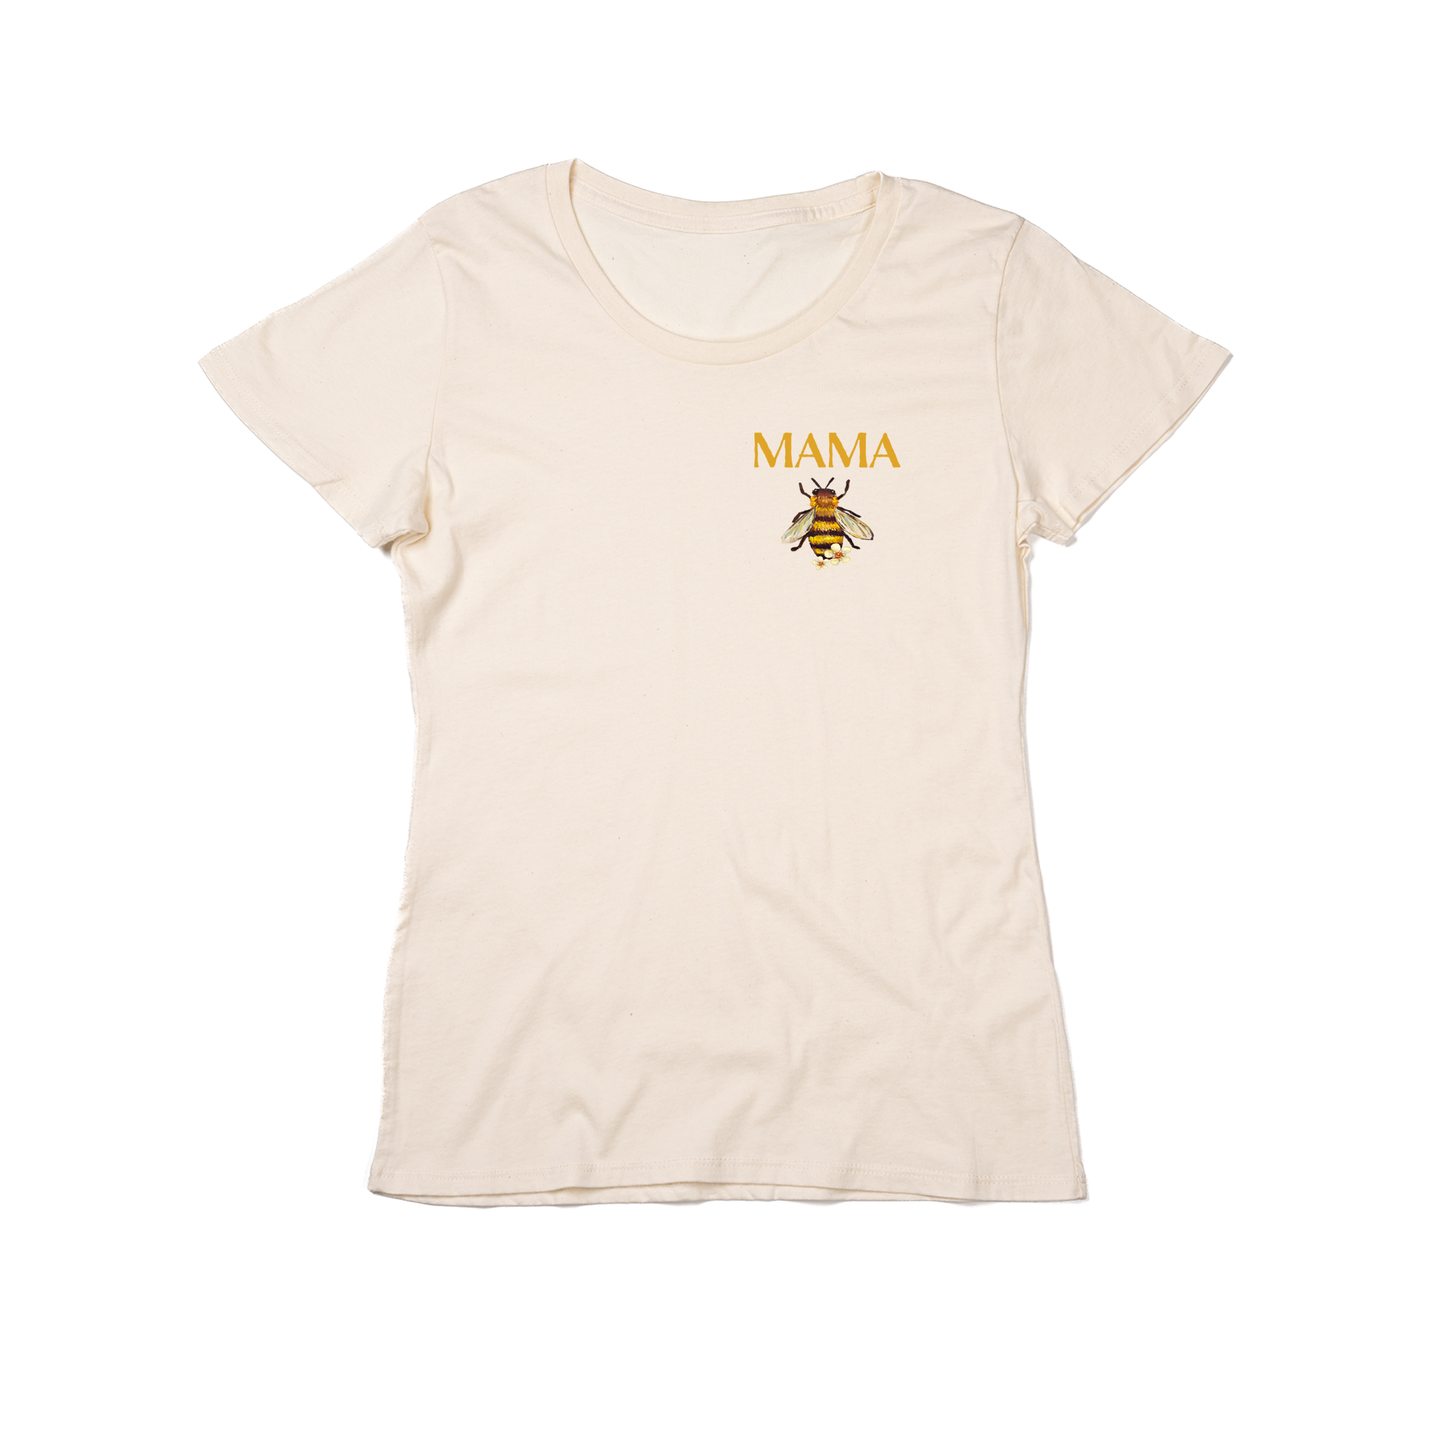 Mama Bee (Pocket) - Women's Fitted Tee (Natural)